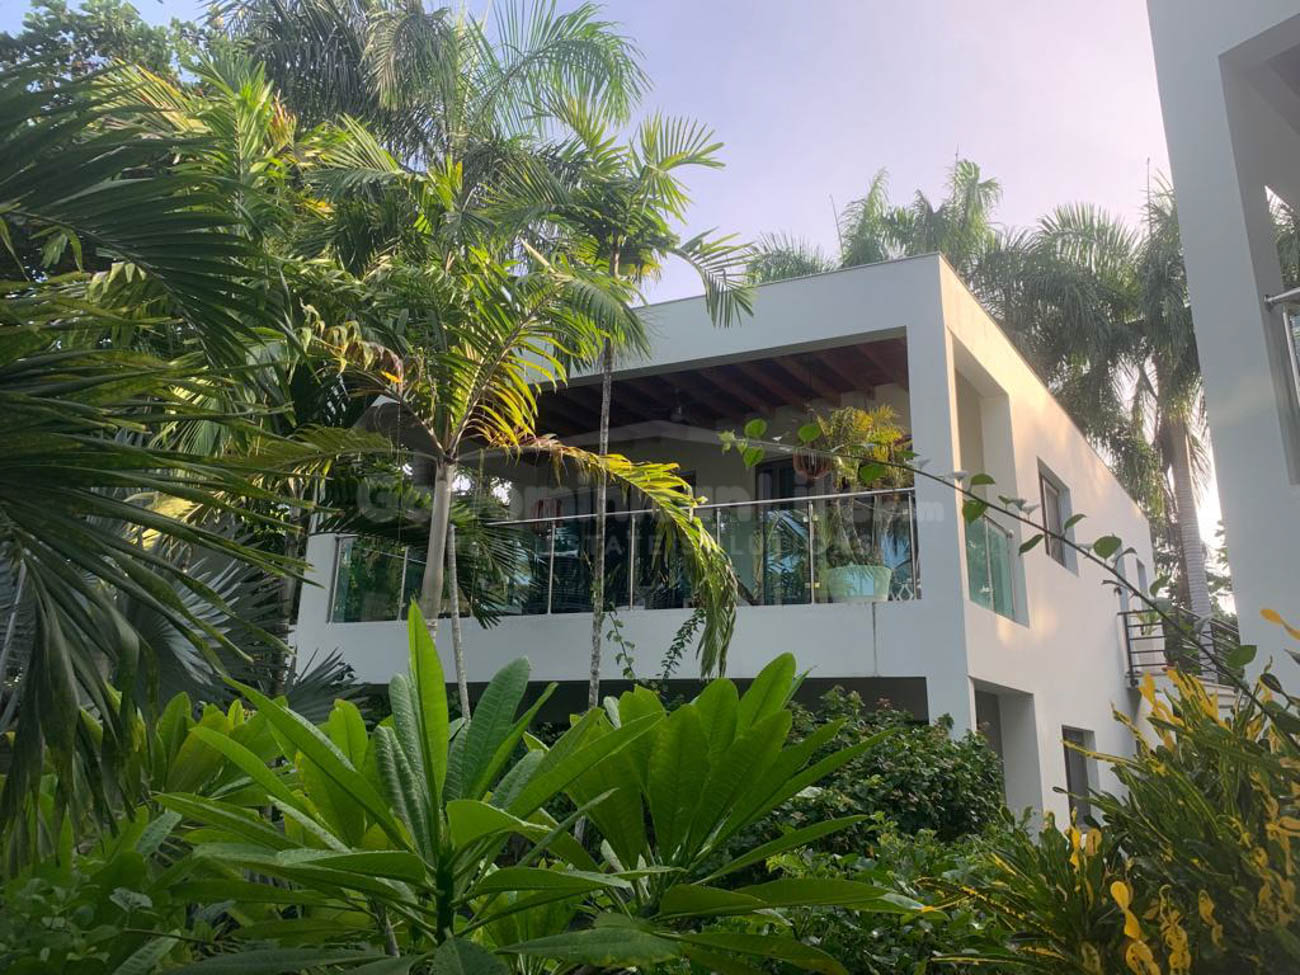 Lush Nature and Tranquil Surroundings in the Town of Cabarete